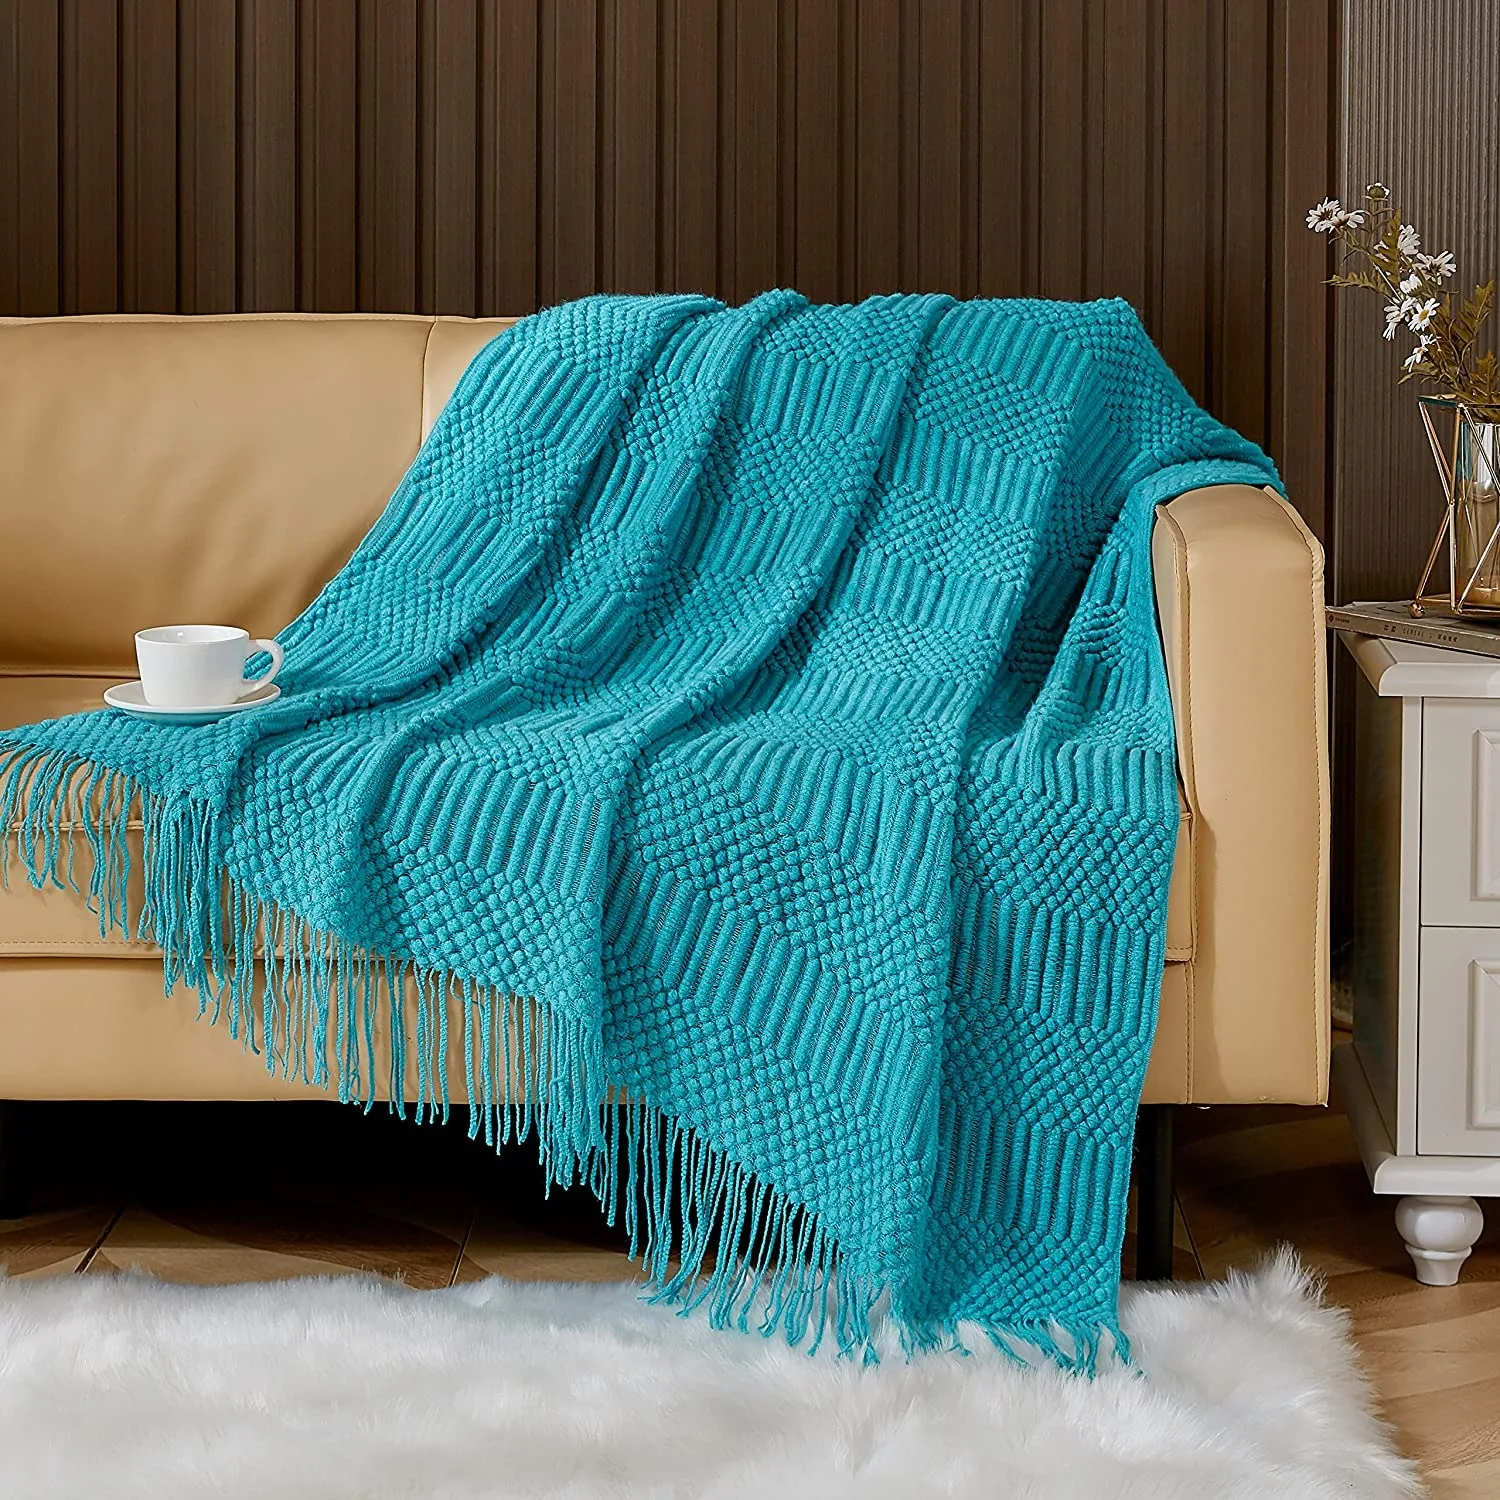 

Inya Navy All Throw Blanket for Couch Sofa Bed Decorative Knitted Blanket with Tassels, Soft Lightweight Cozy Textured Blankets